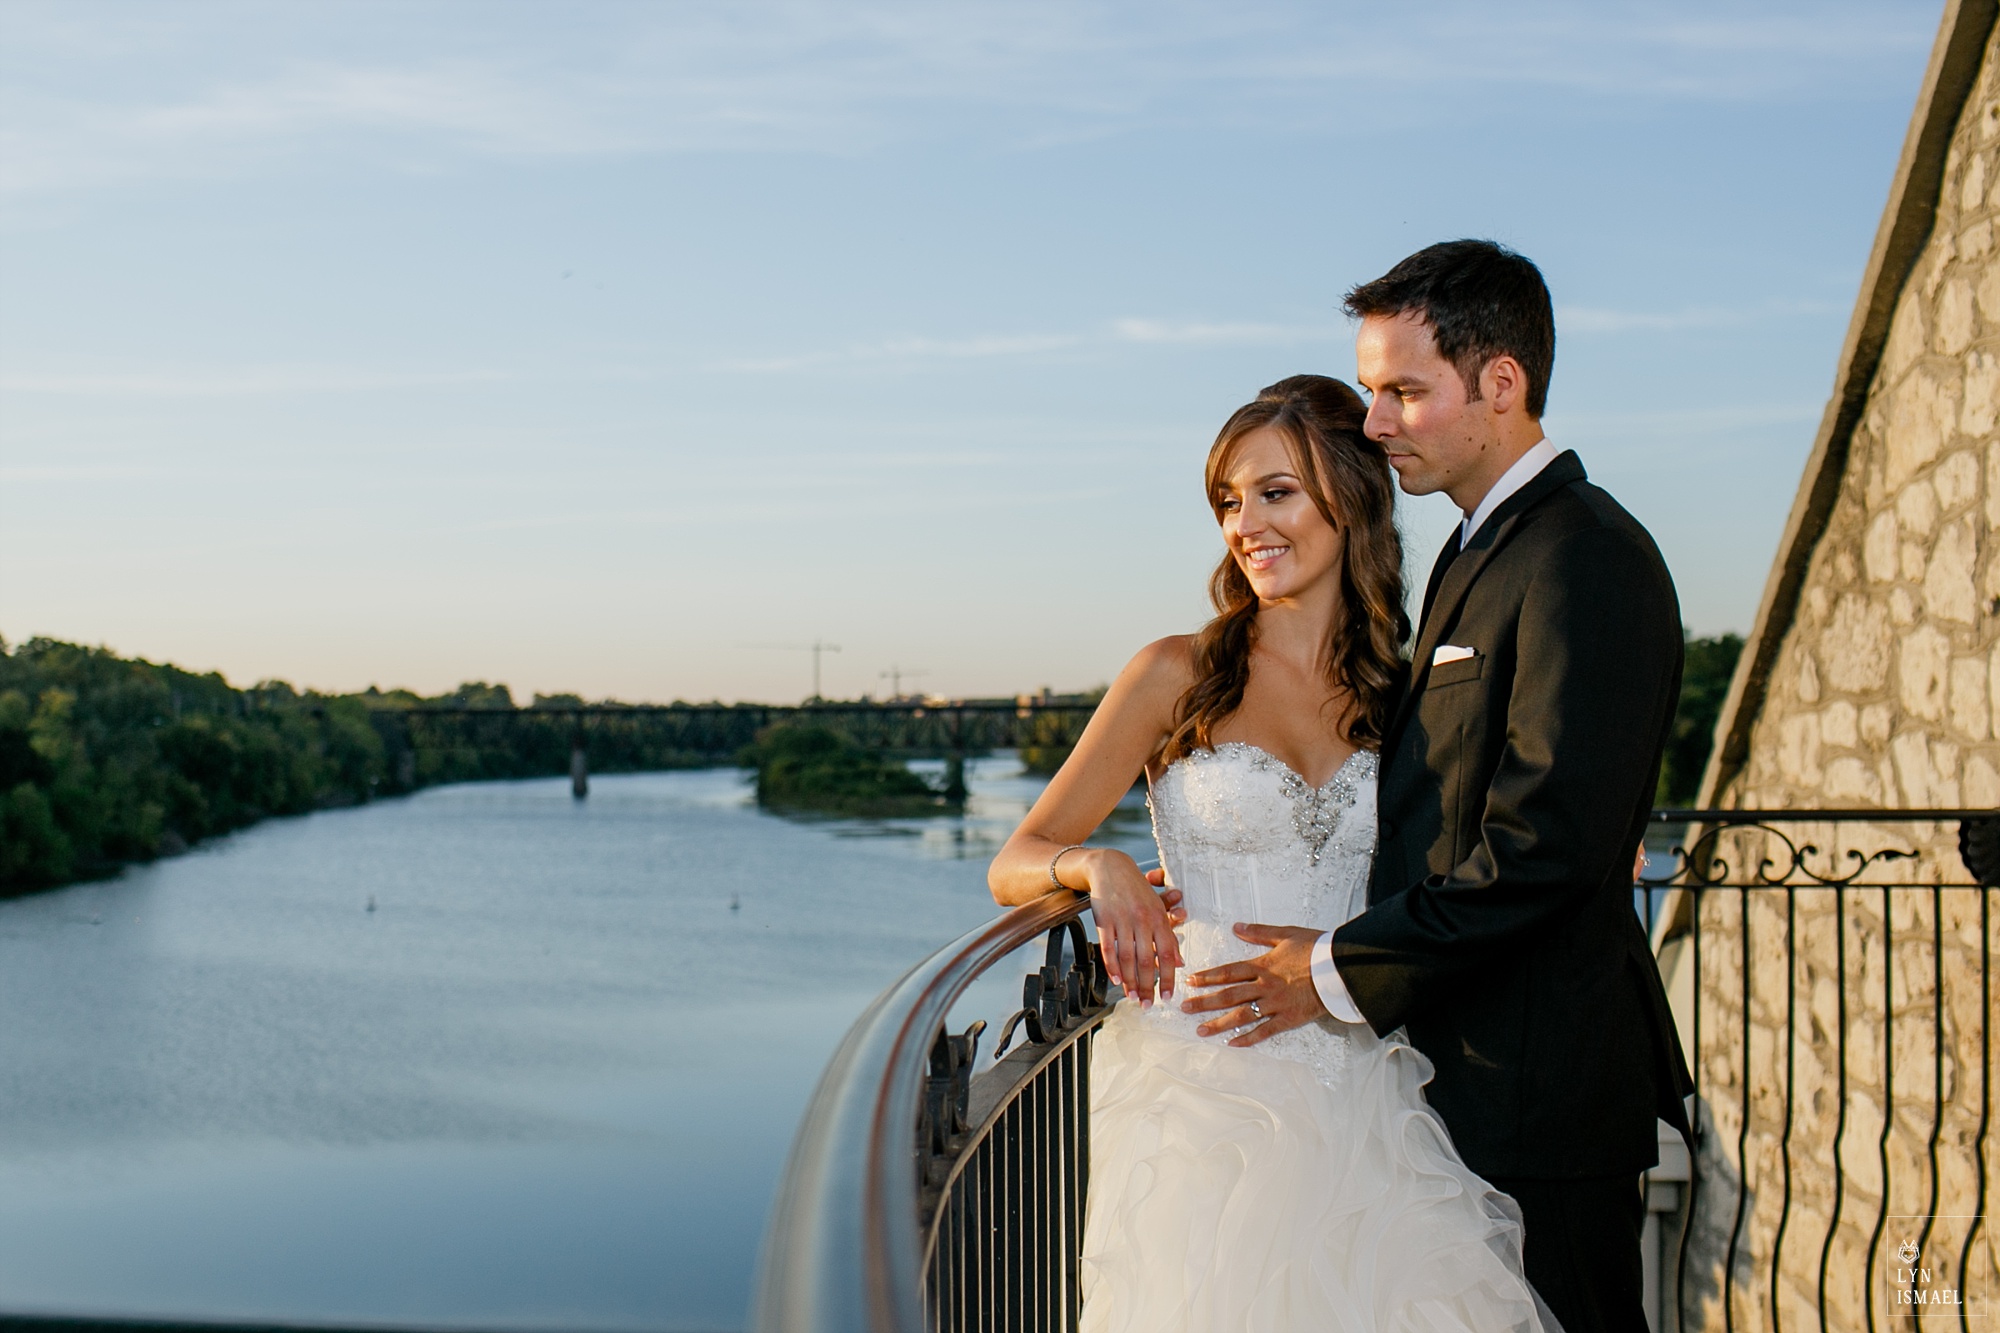 Cambridge Mill wedding photo at the balcony overlooking the river.